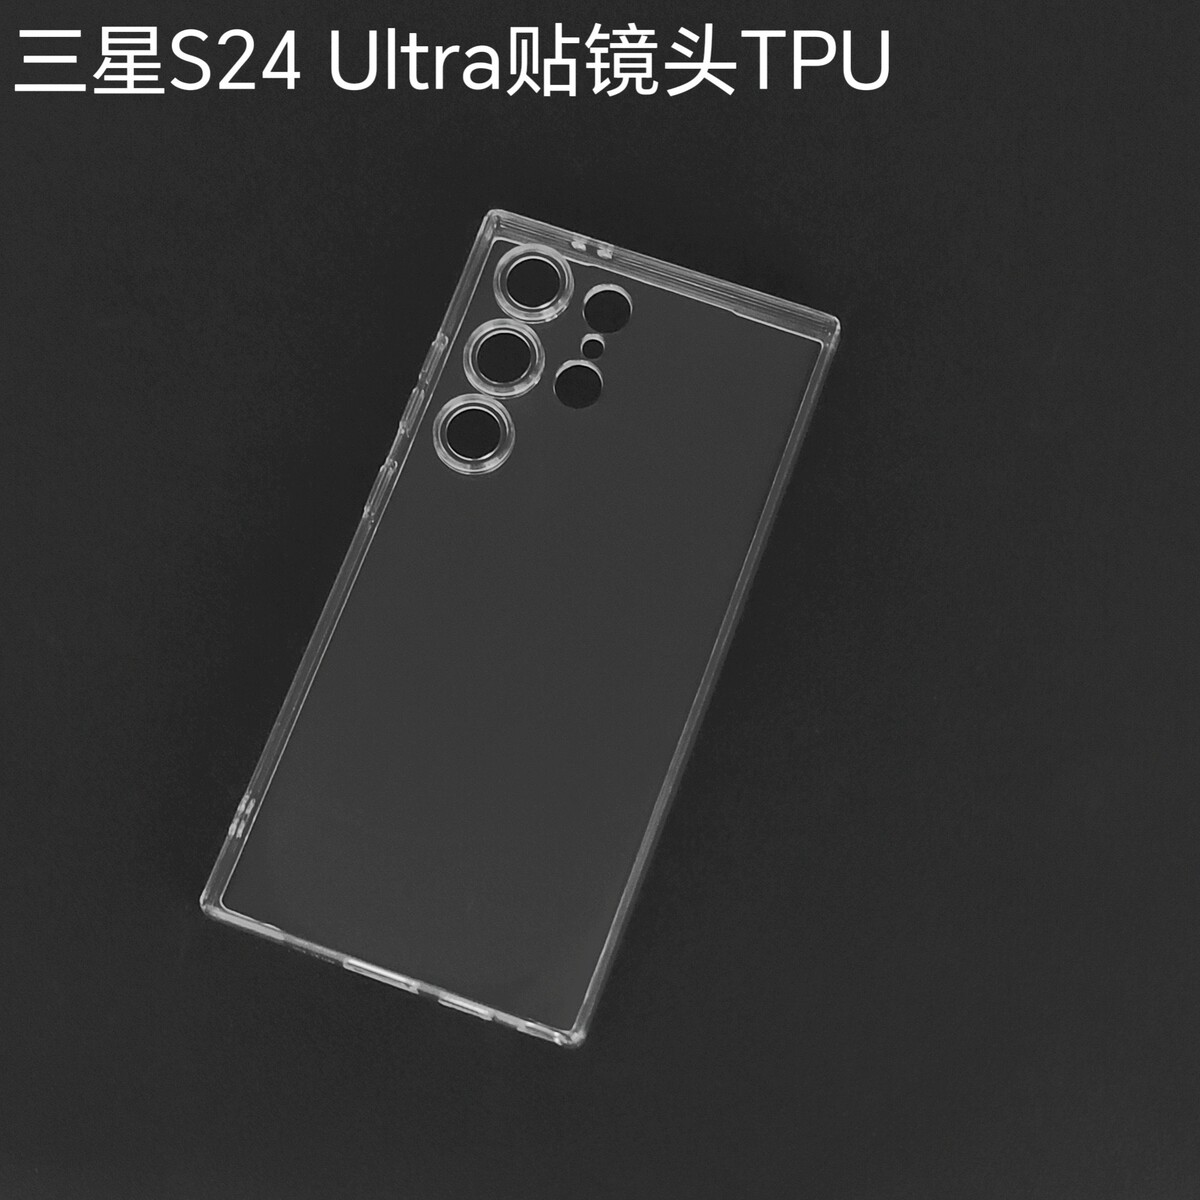 Samsung Galaxy S24 Ultra: Leaker shows early case design of